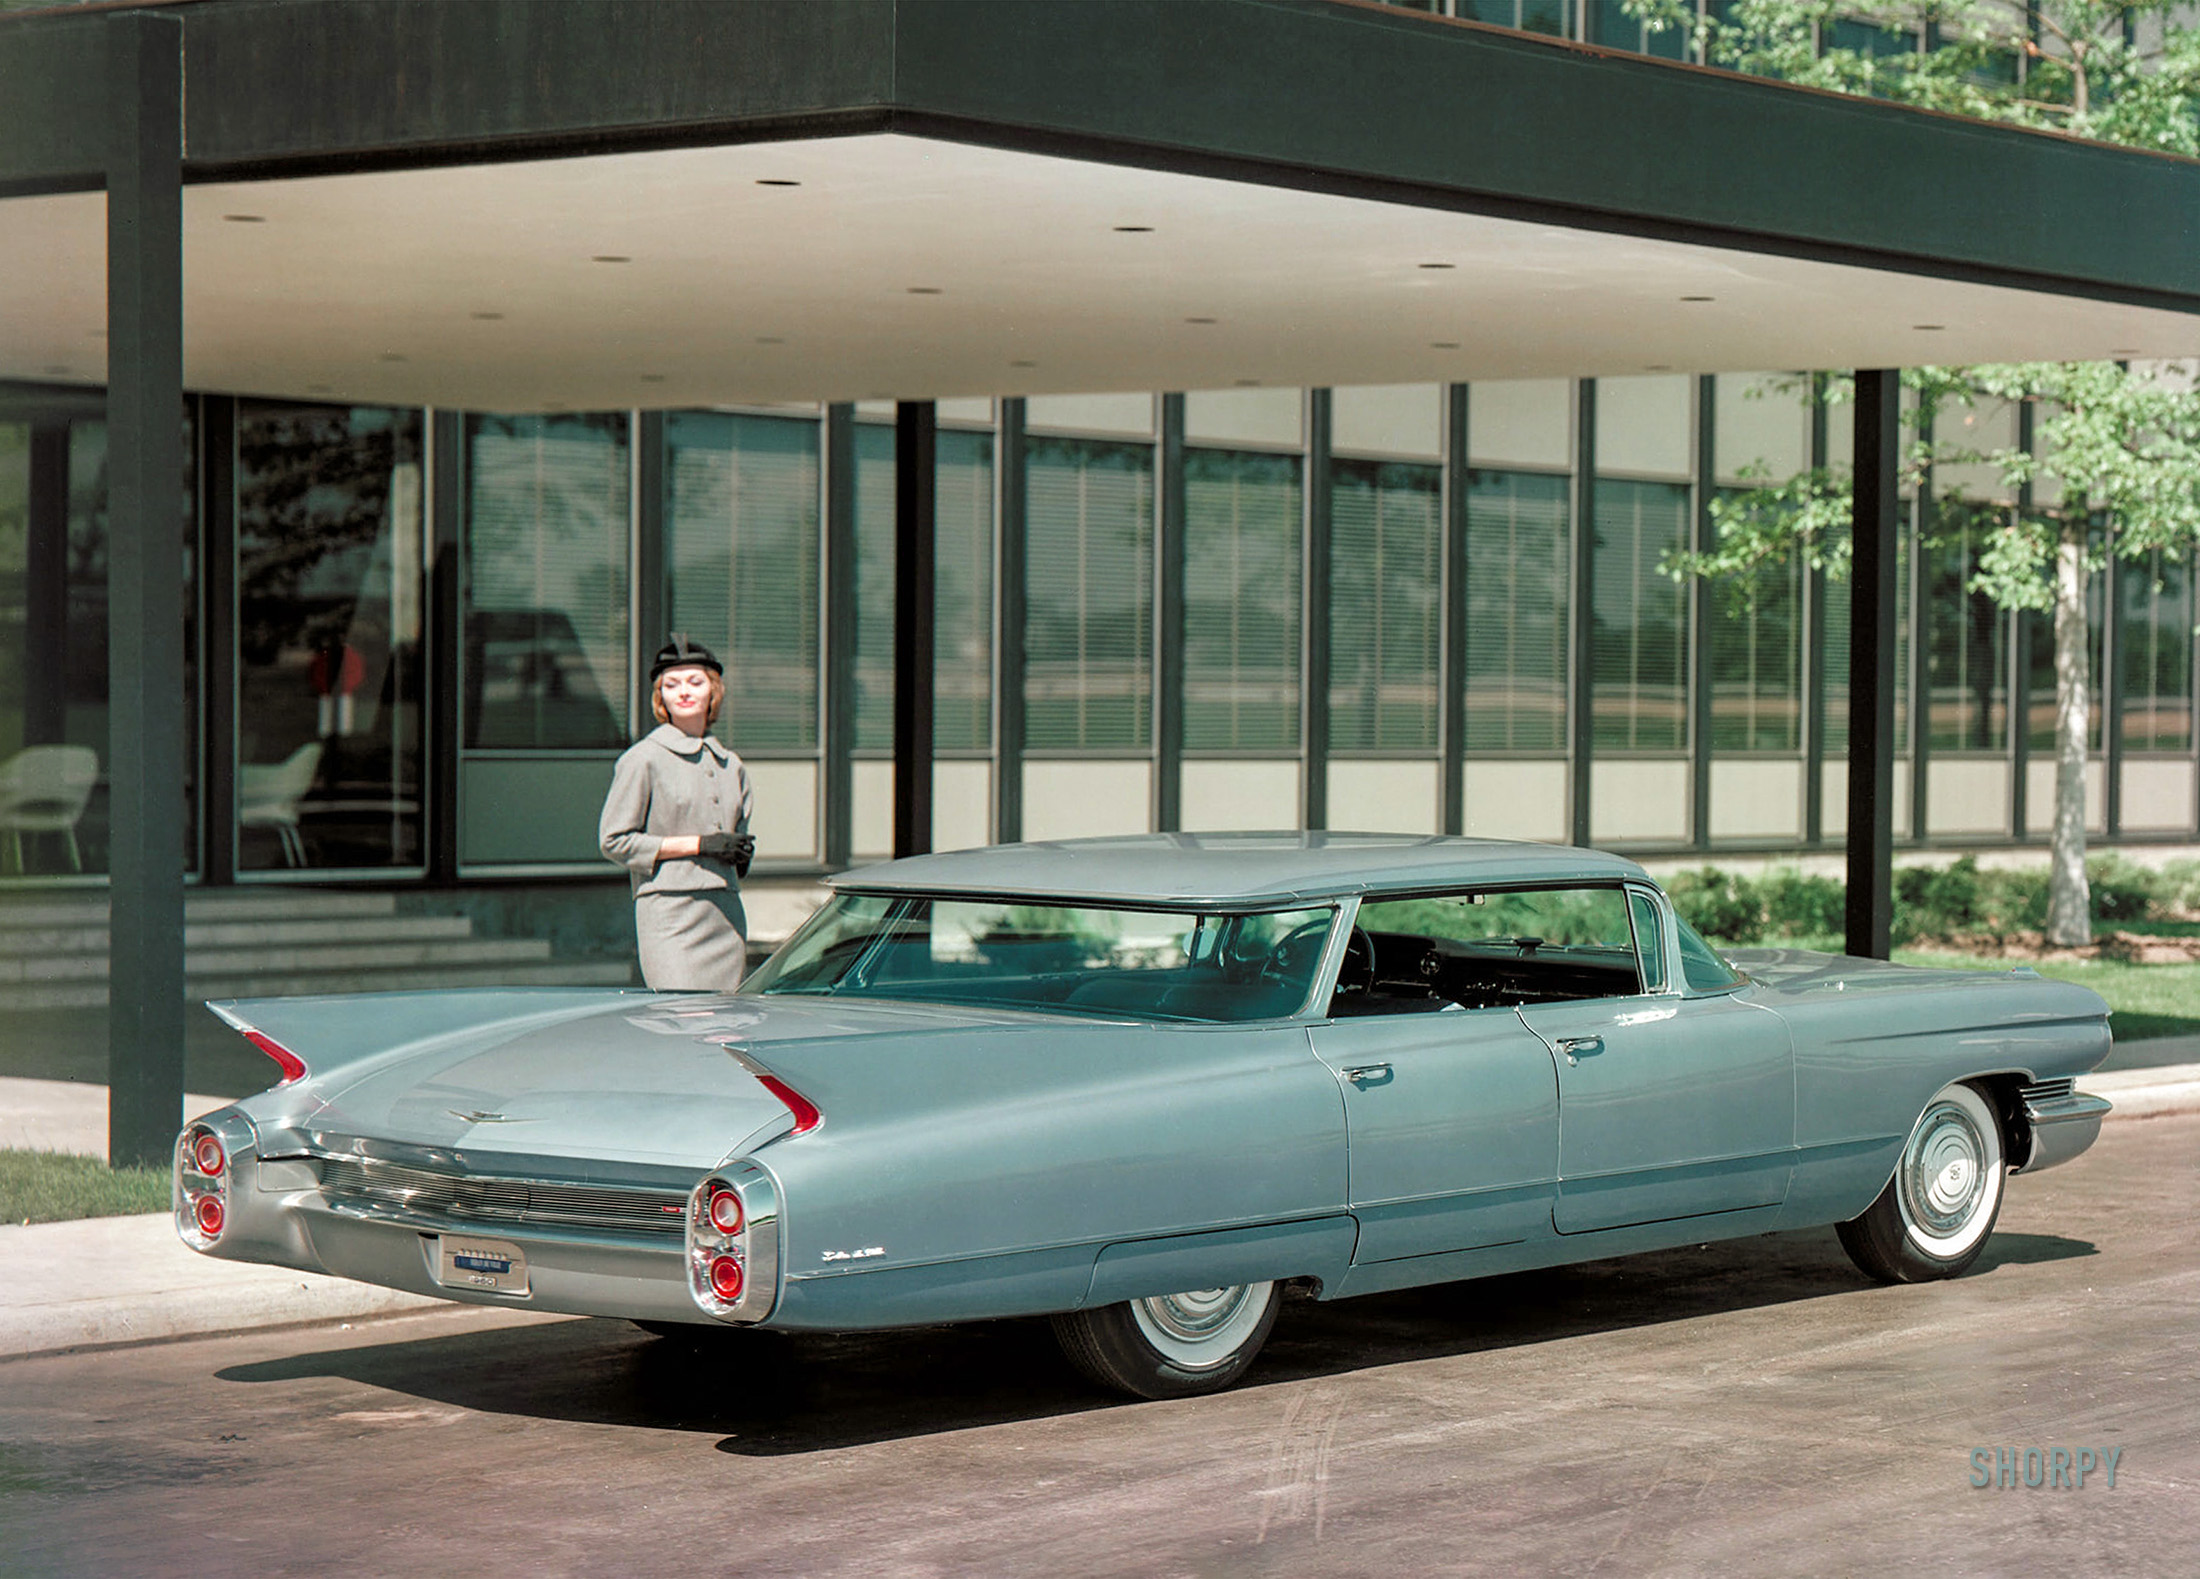 Warren, Michigan, sometime in 1959. "Nineteen-Sixty Cadillac 6339 four-window Sedan de Ville at the GM Technical Center." This was a General Motors body style popularly known as the "flat top." Color transparency from the GM photographic archive. View full size.